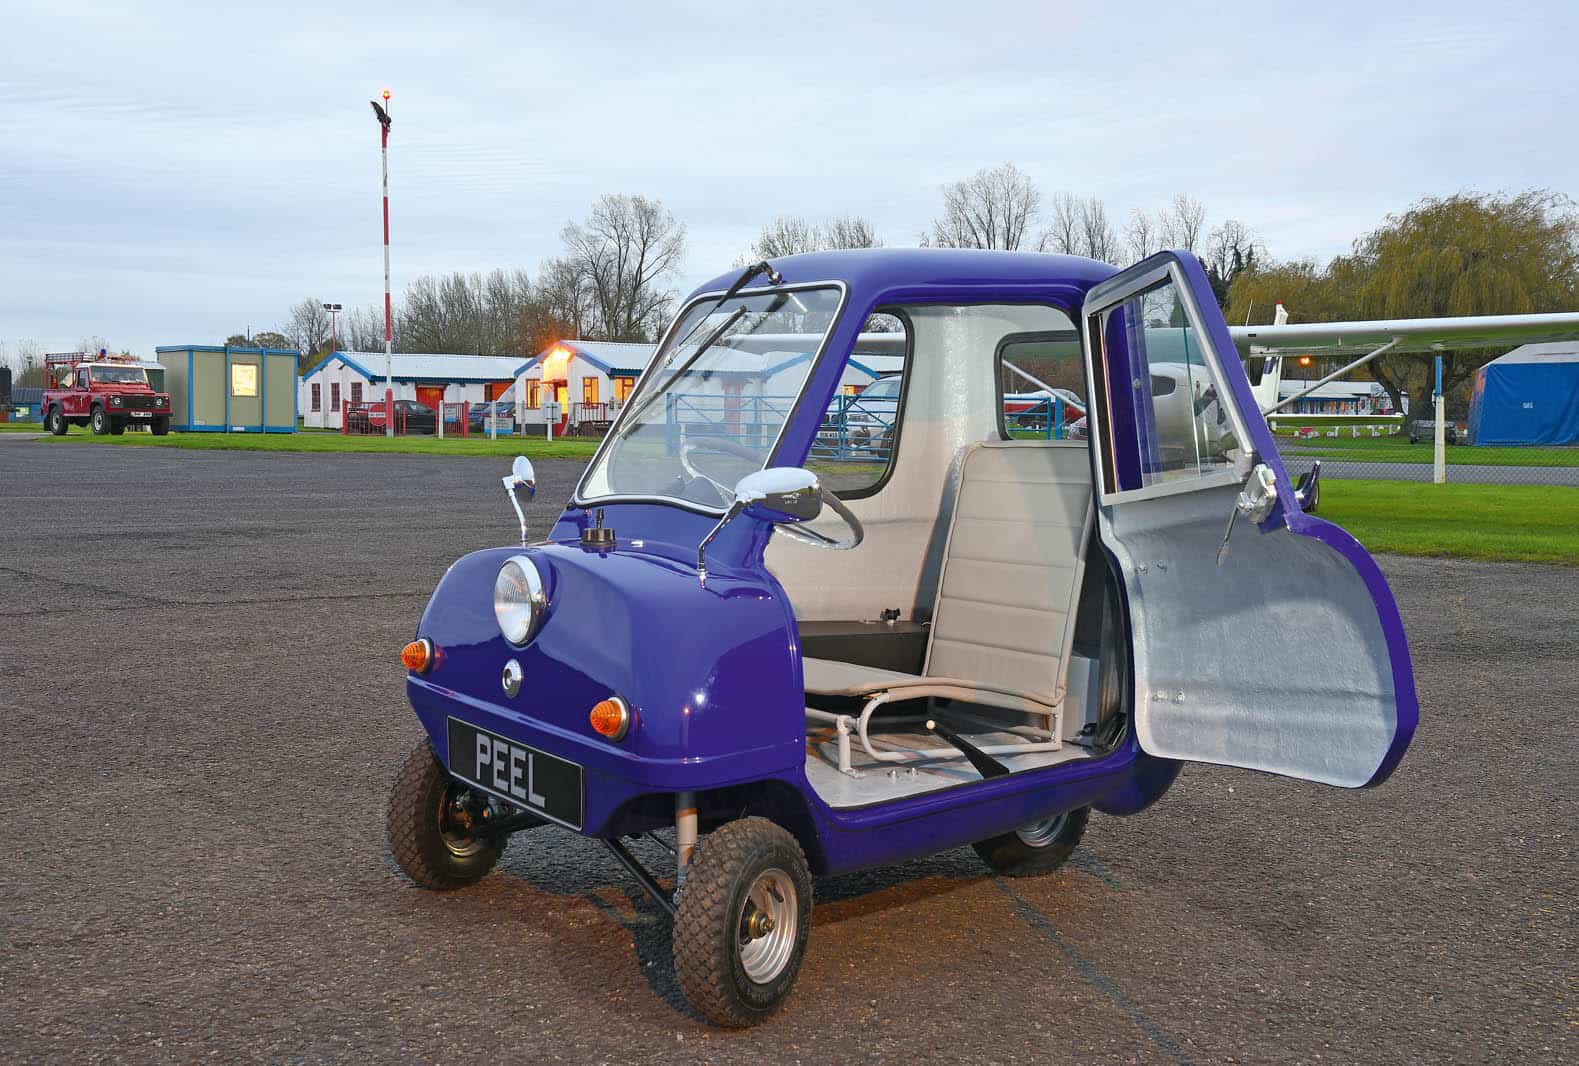 Peel P50, smallest car in the world